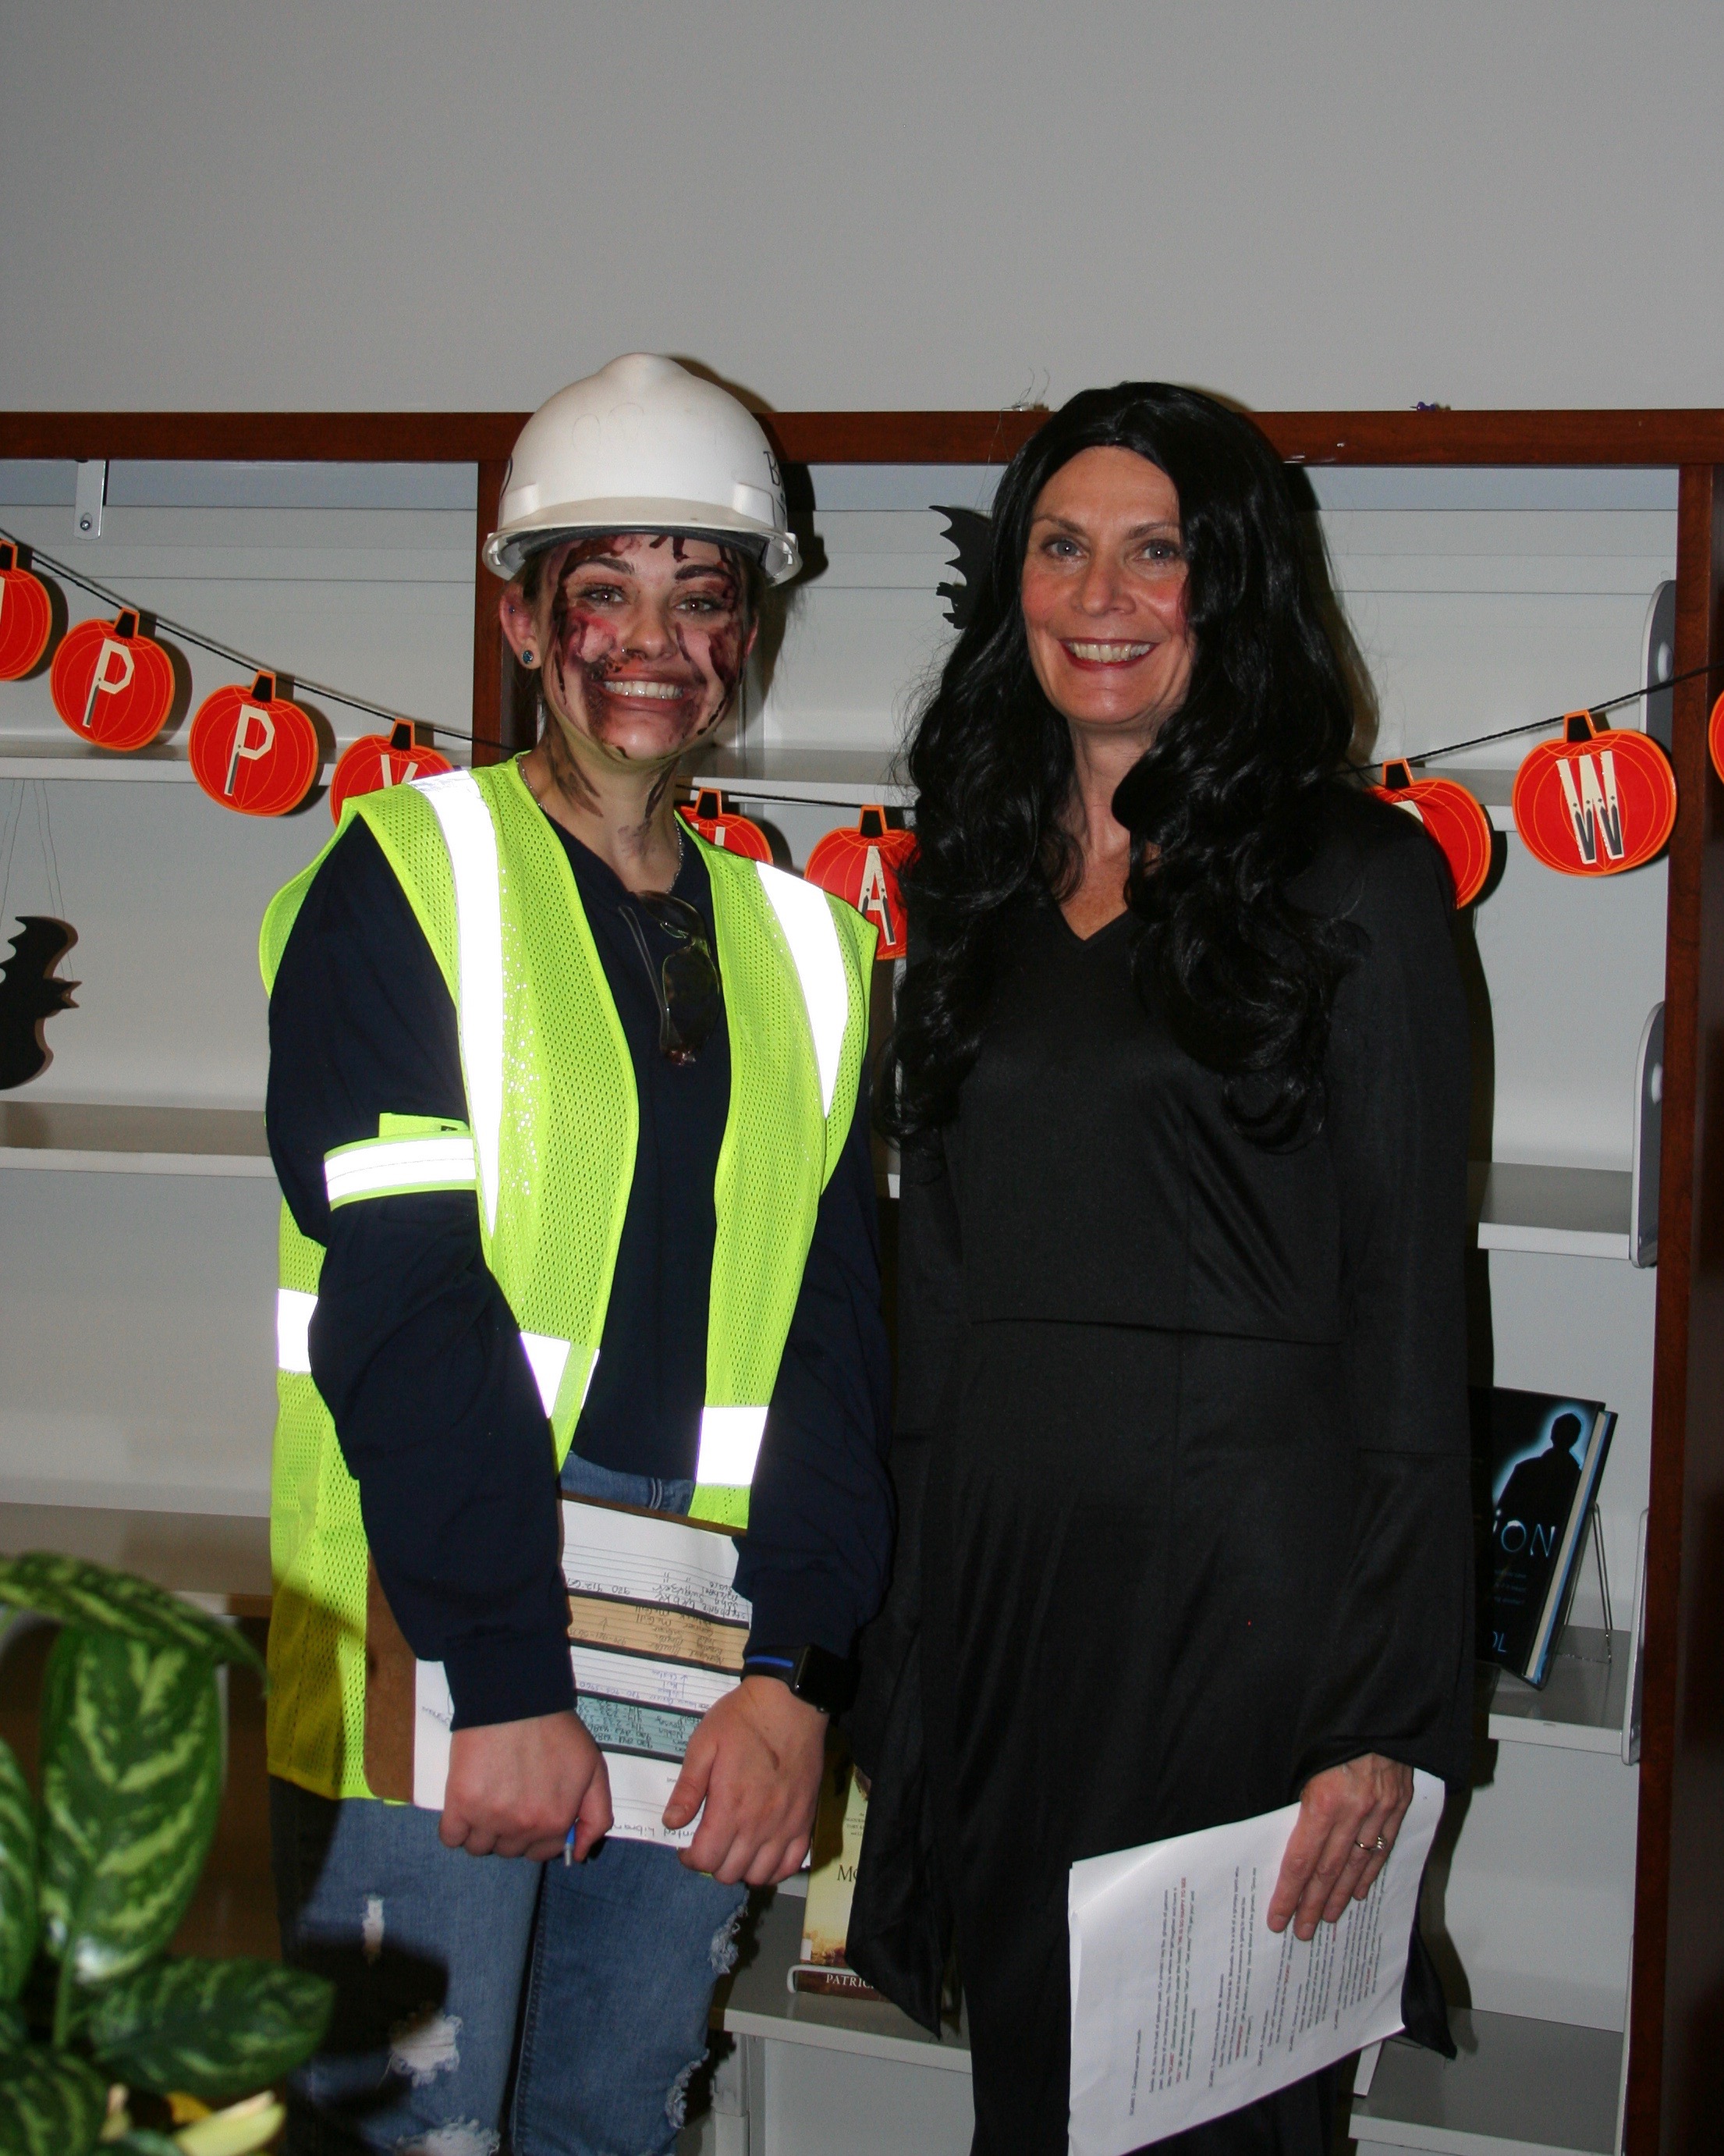 Person dressed as construction worker posing with woman at event